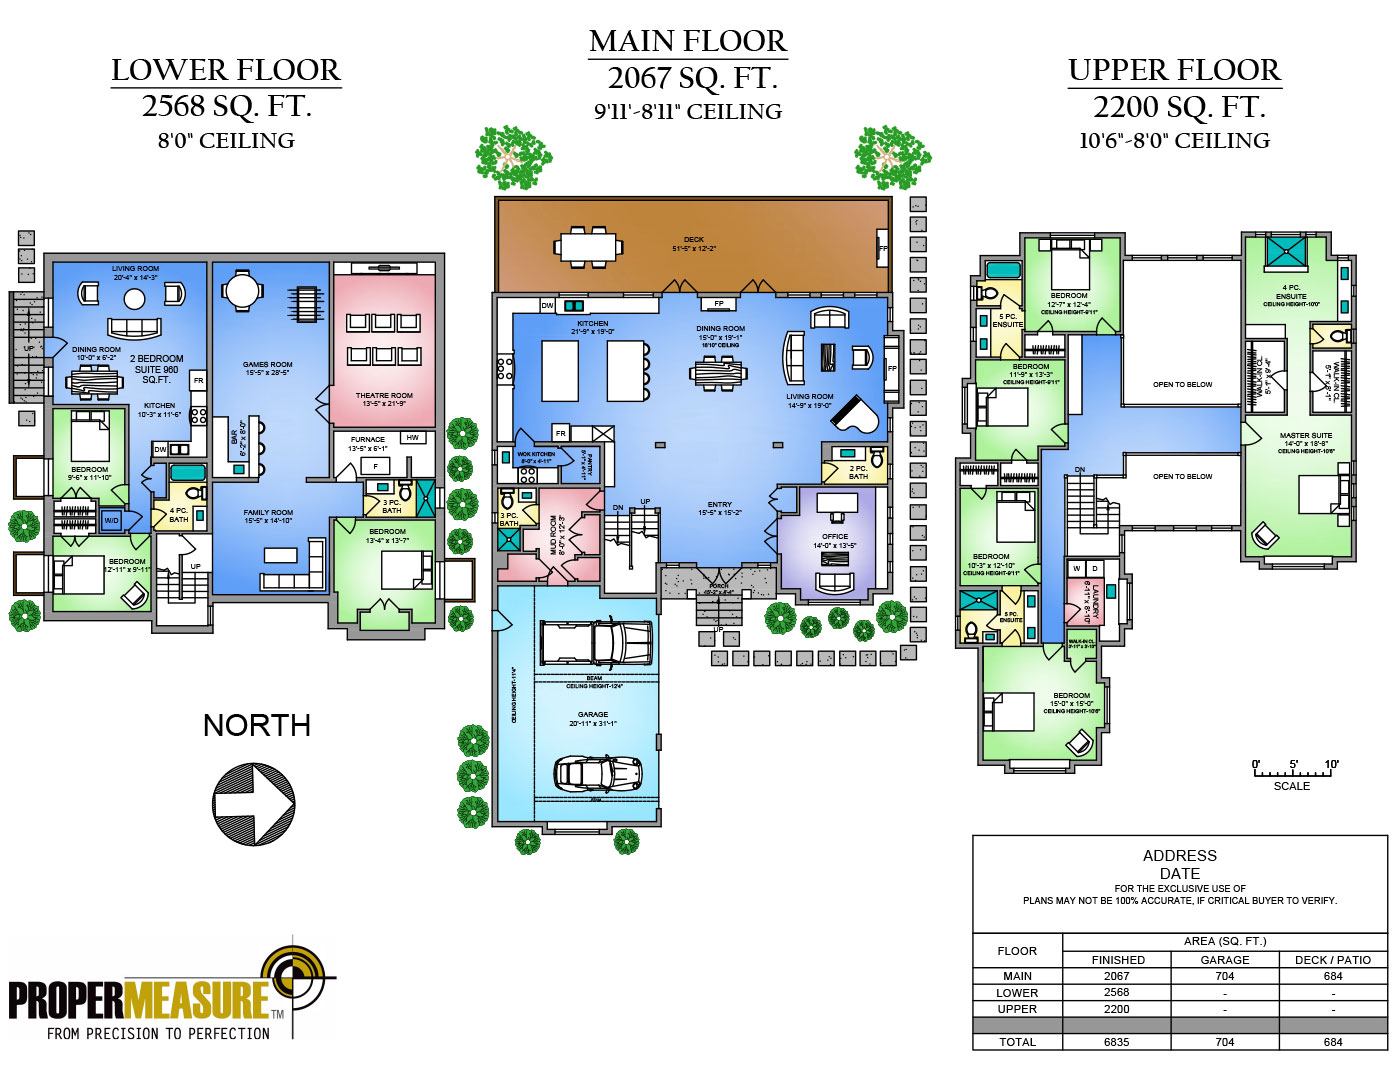 Proper Measure Colourful floor plans for your real